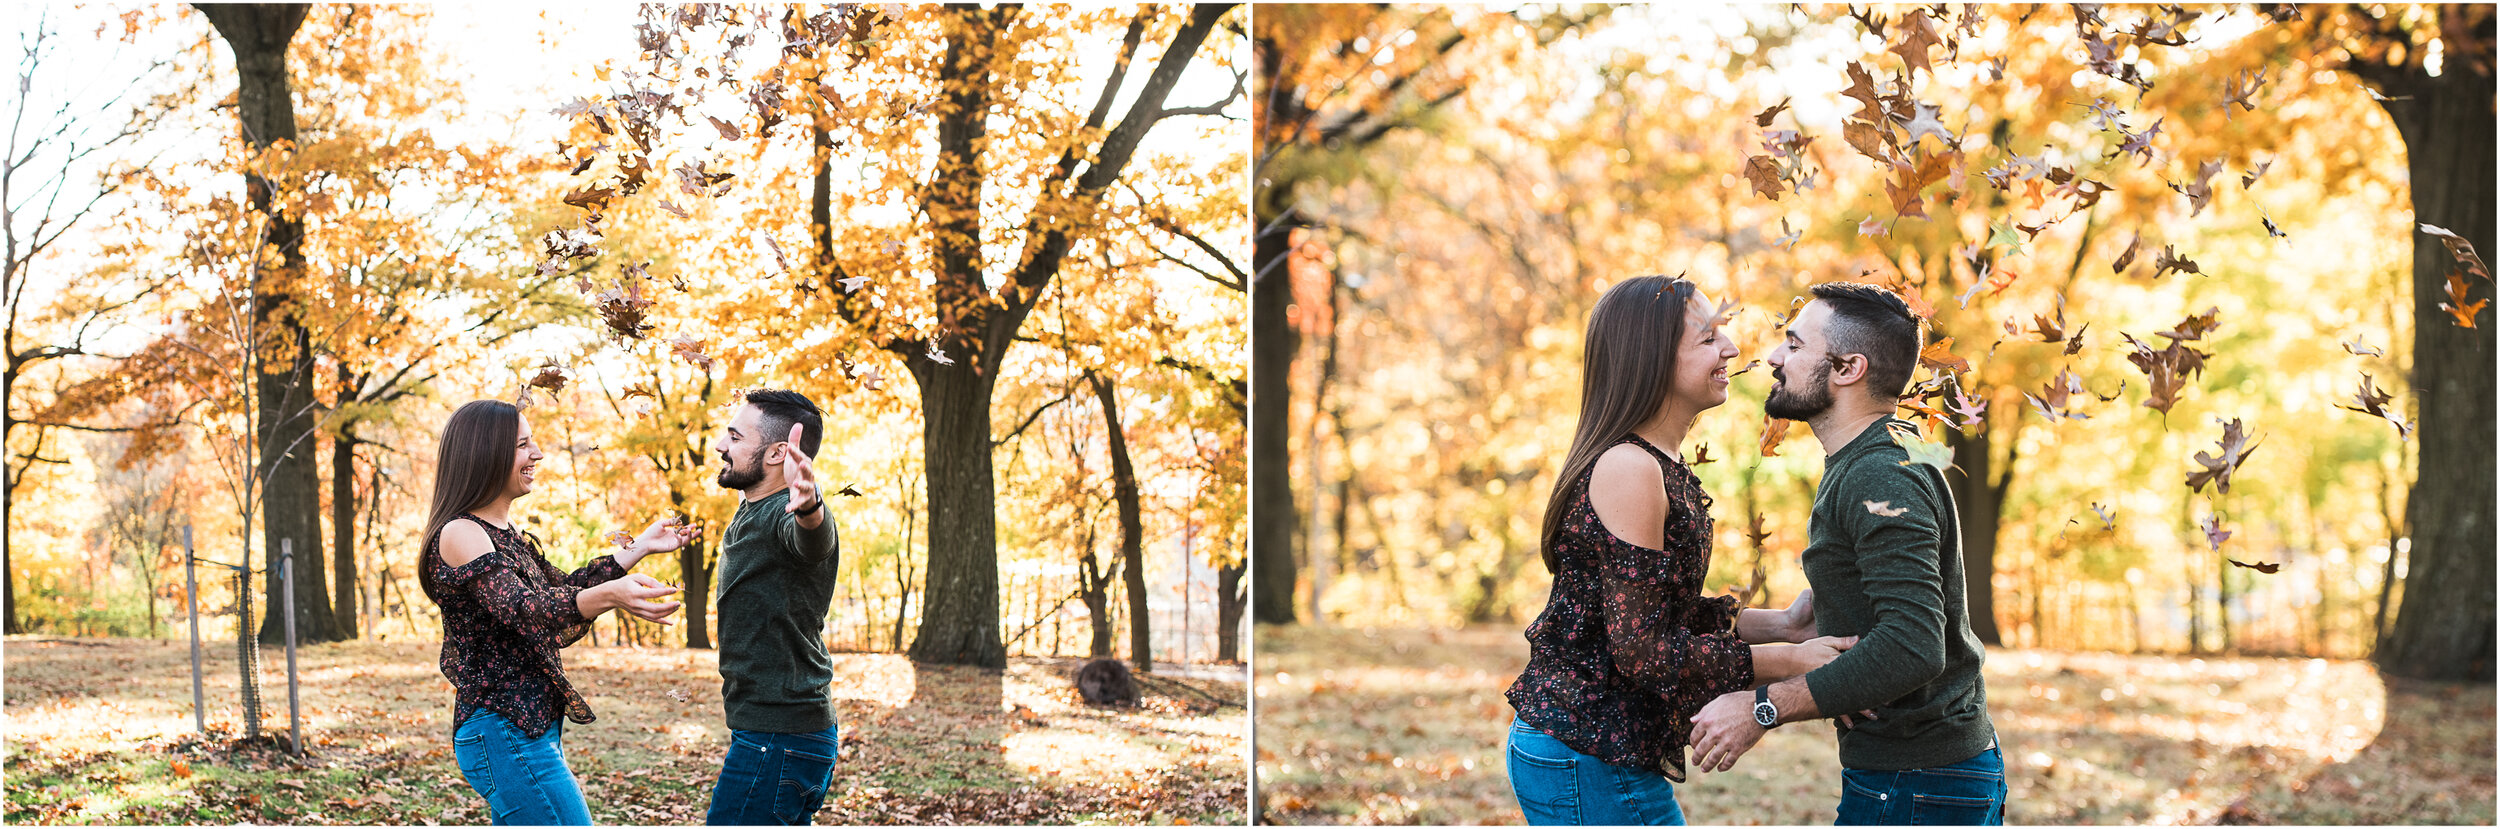 fall engagement session, pittsburgh pa.jpg